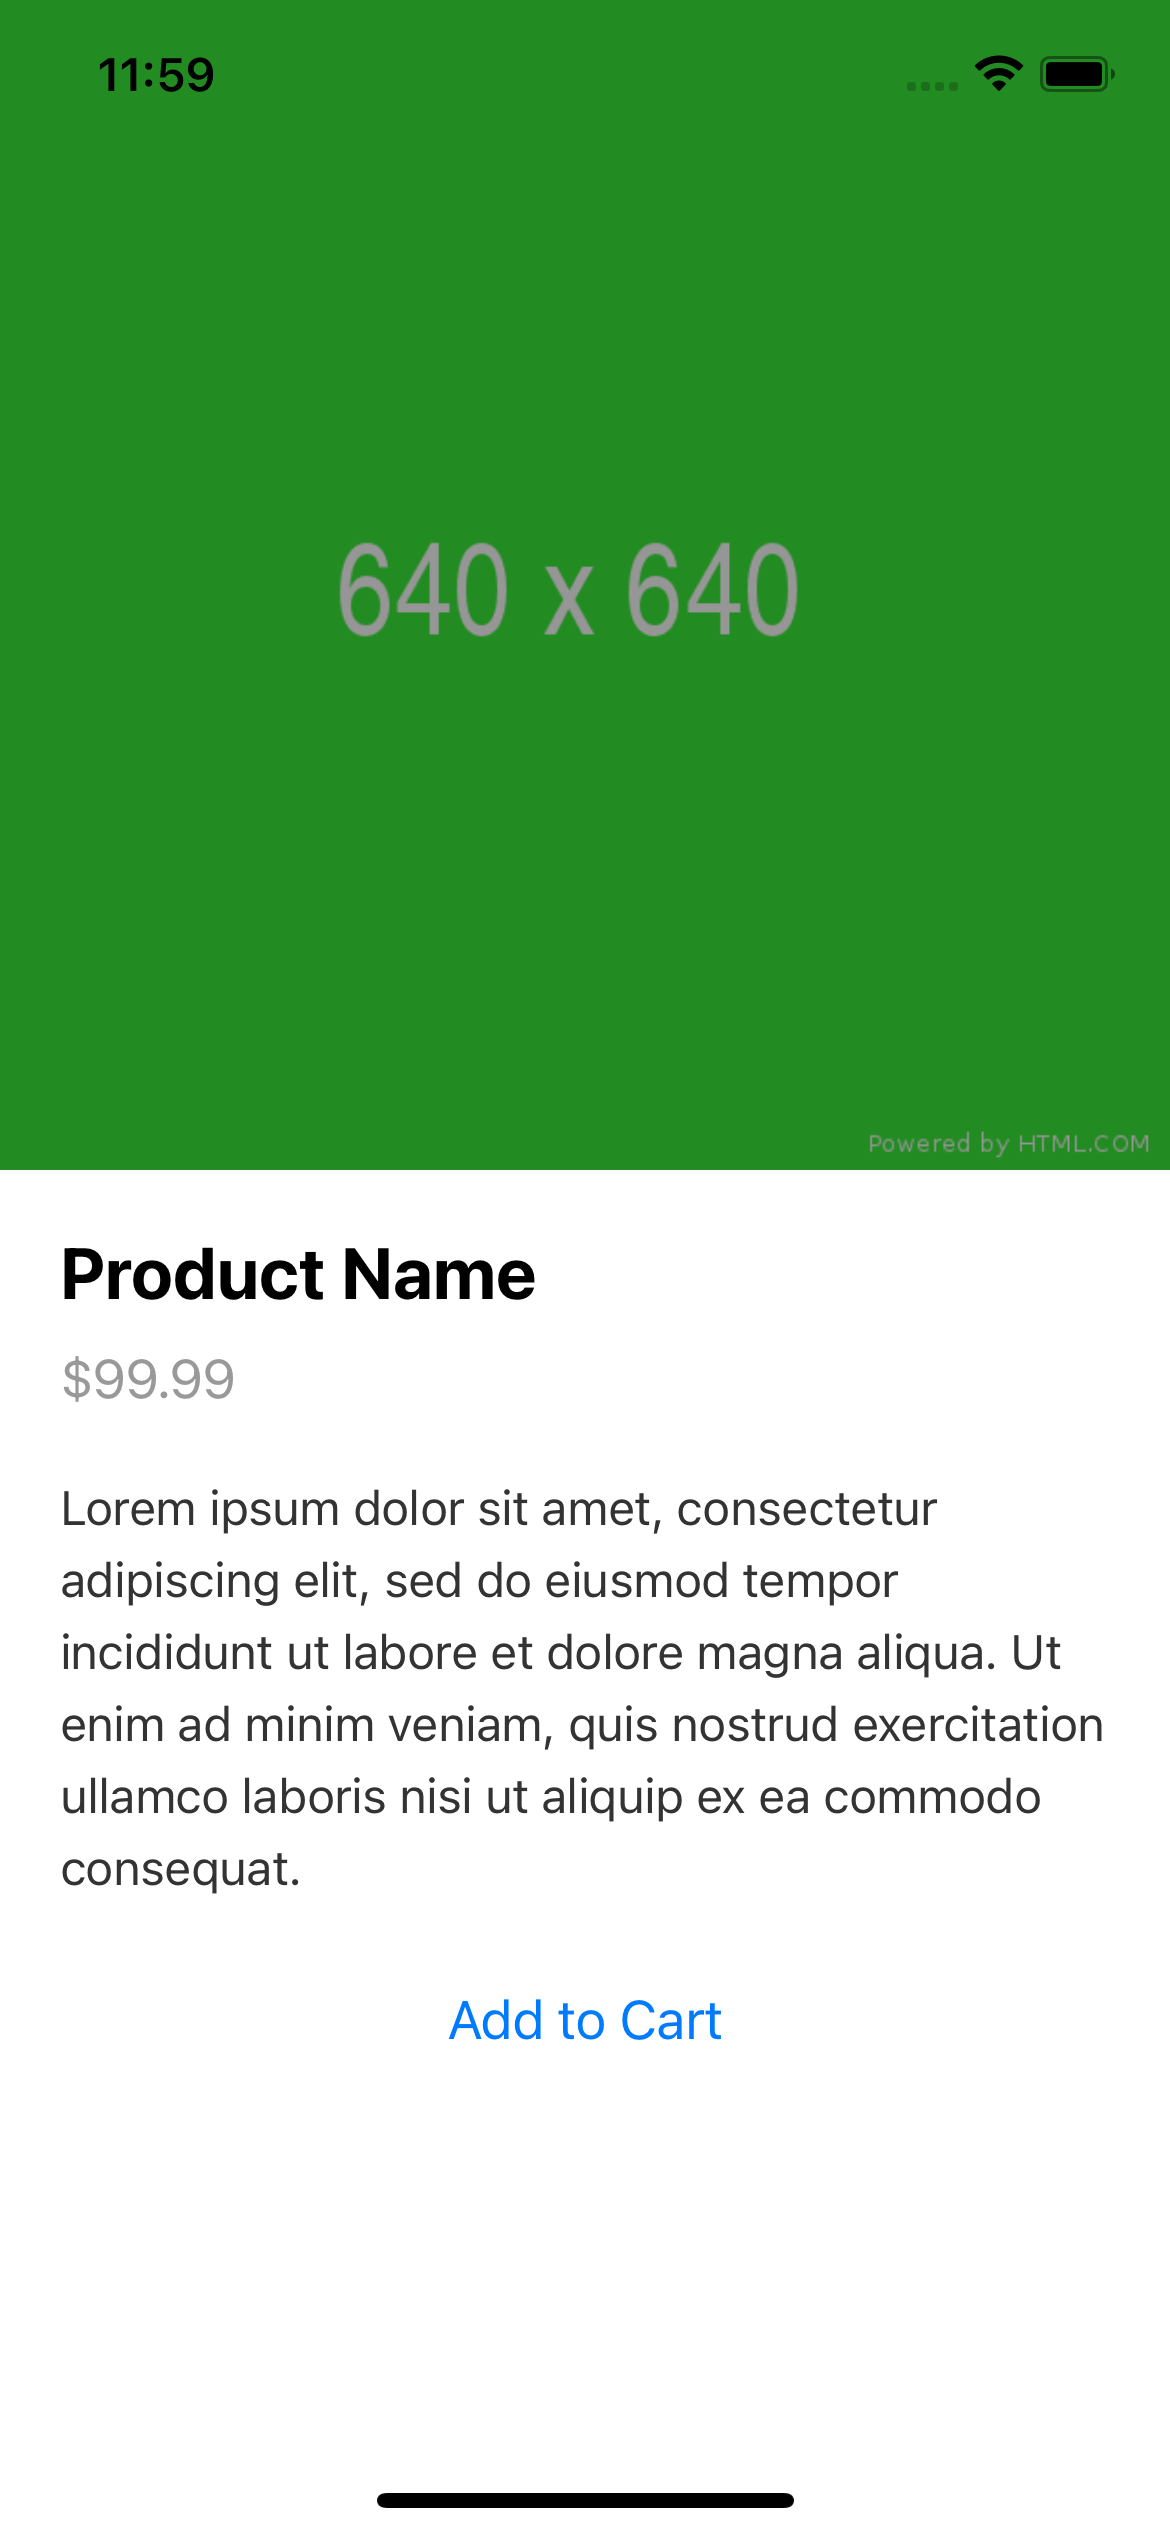 React native template. Product detail view